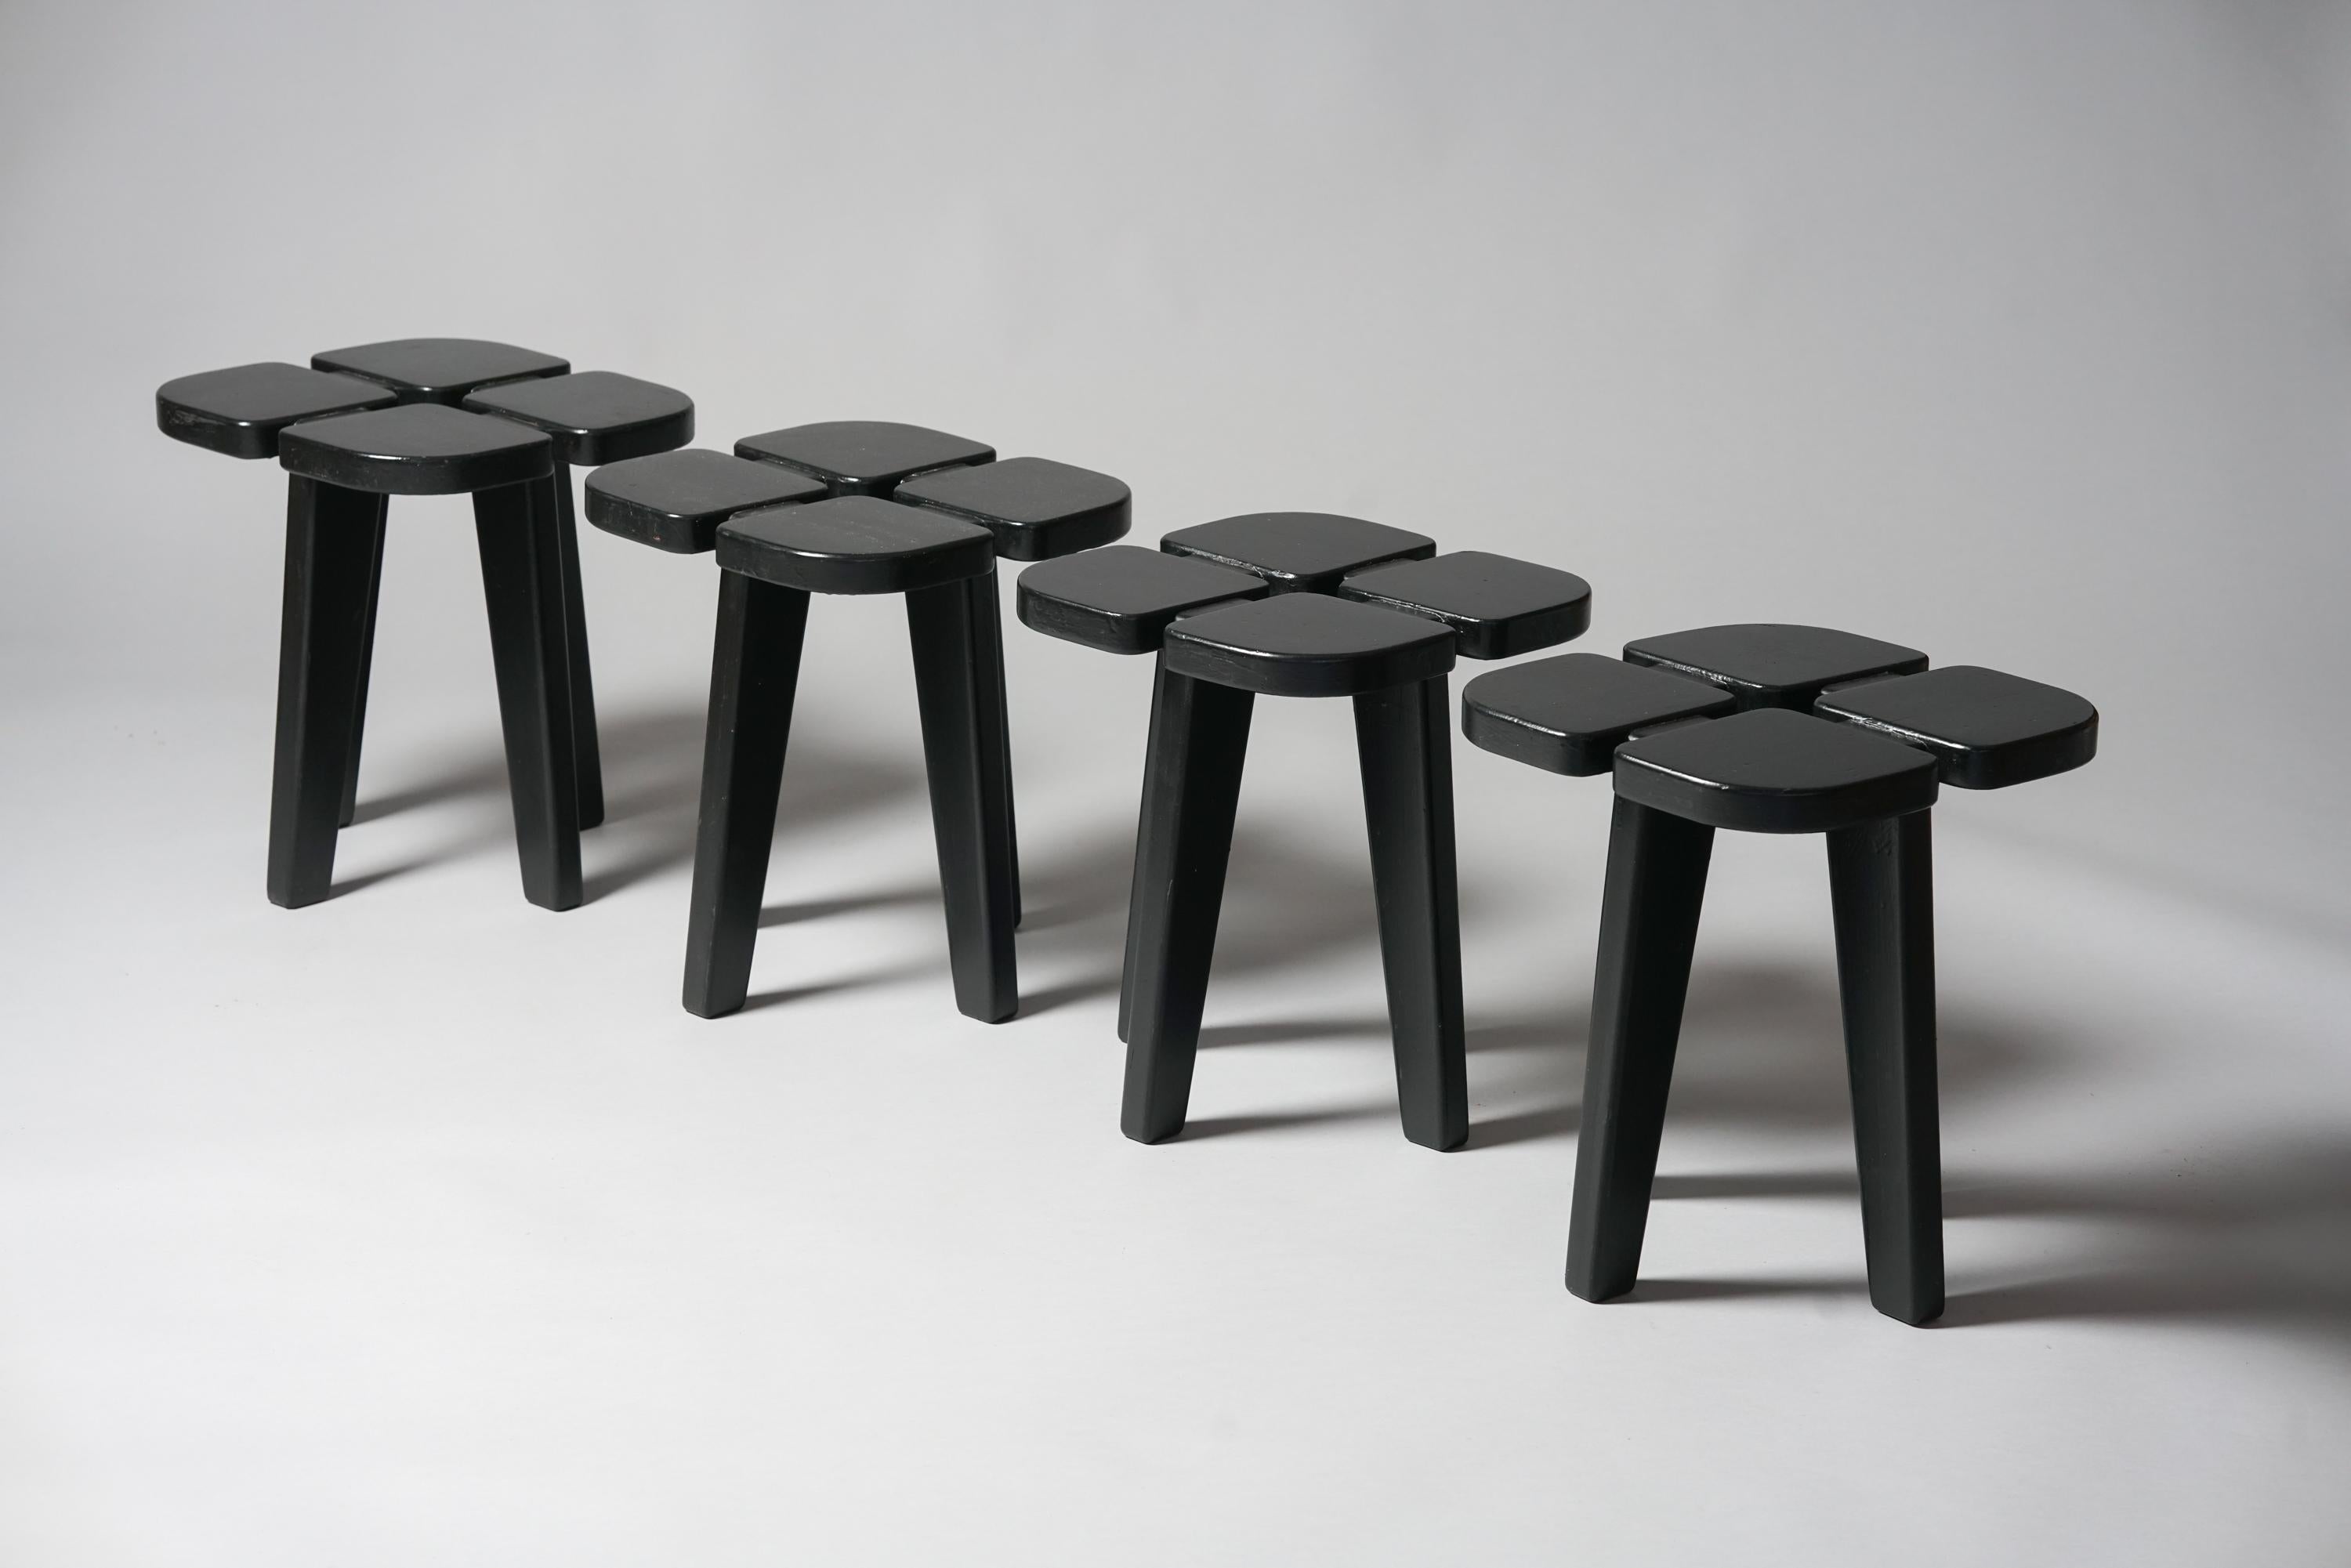 Set Of four Scandinavian Modern stools model Apila by Rauni Peippo for Keravan Puusepät Oy Finland from the 1950s/1960s, birch. Later painted black. Good vintage condition, minor wear consistent with age and use. The Stools are sold as a set.